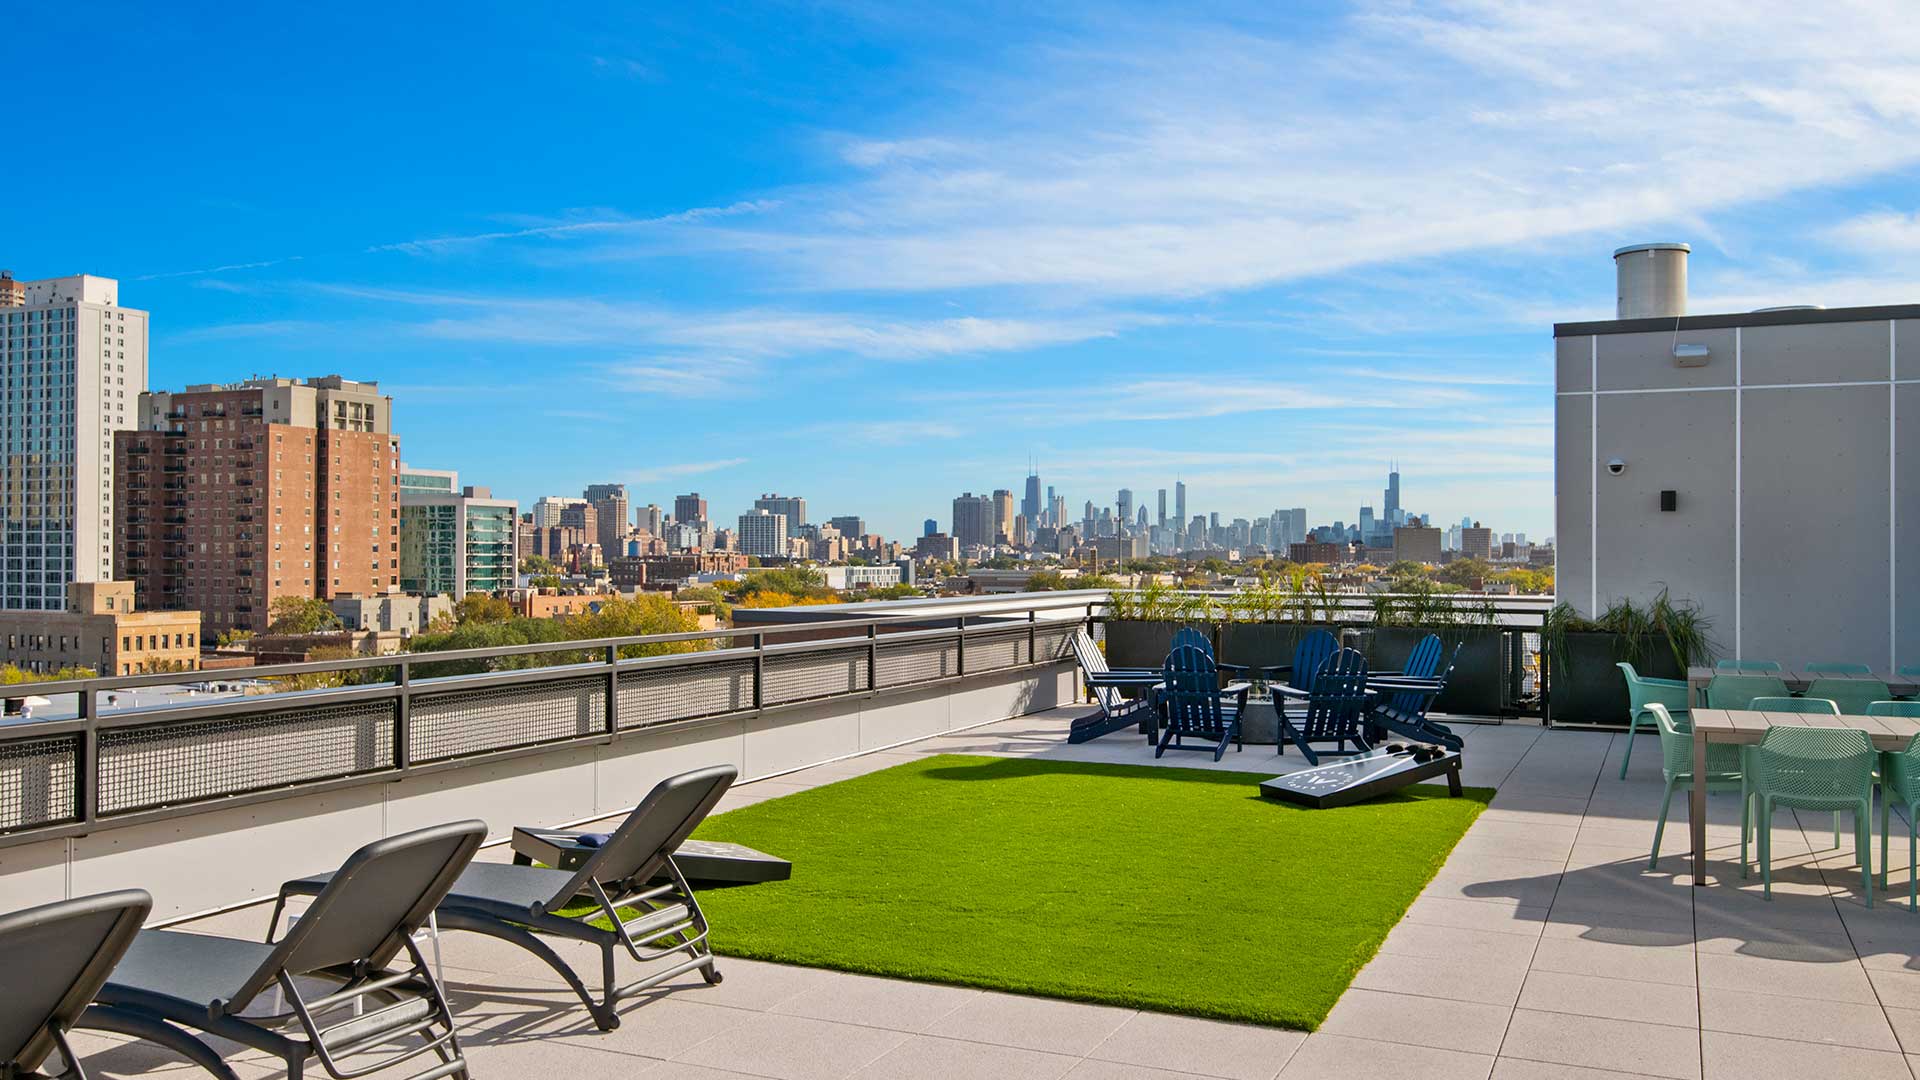 The rooftop deck at Wrigleyville Lofts with the Chicago skyline in the distance. Several lounge chairs line the left with turf and a bags game ahead.